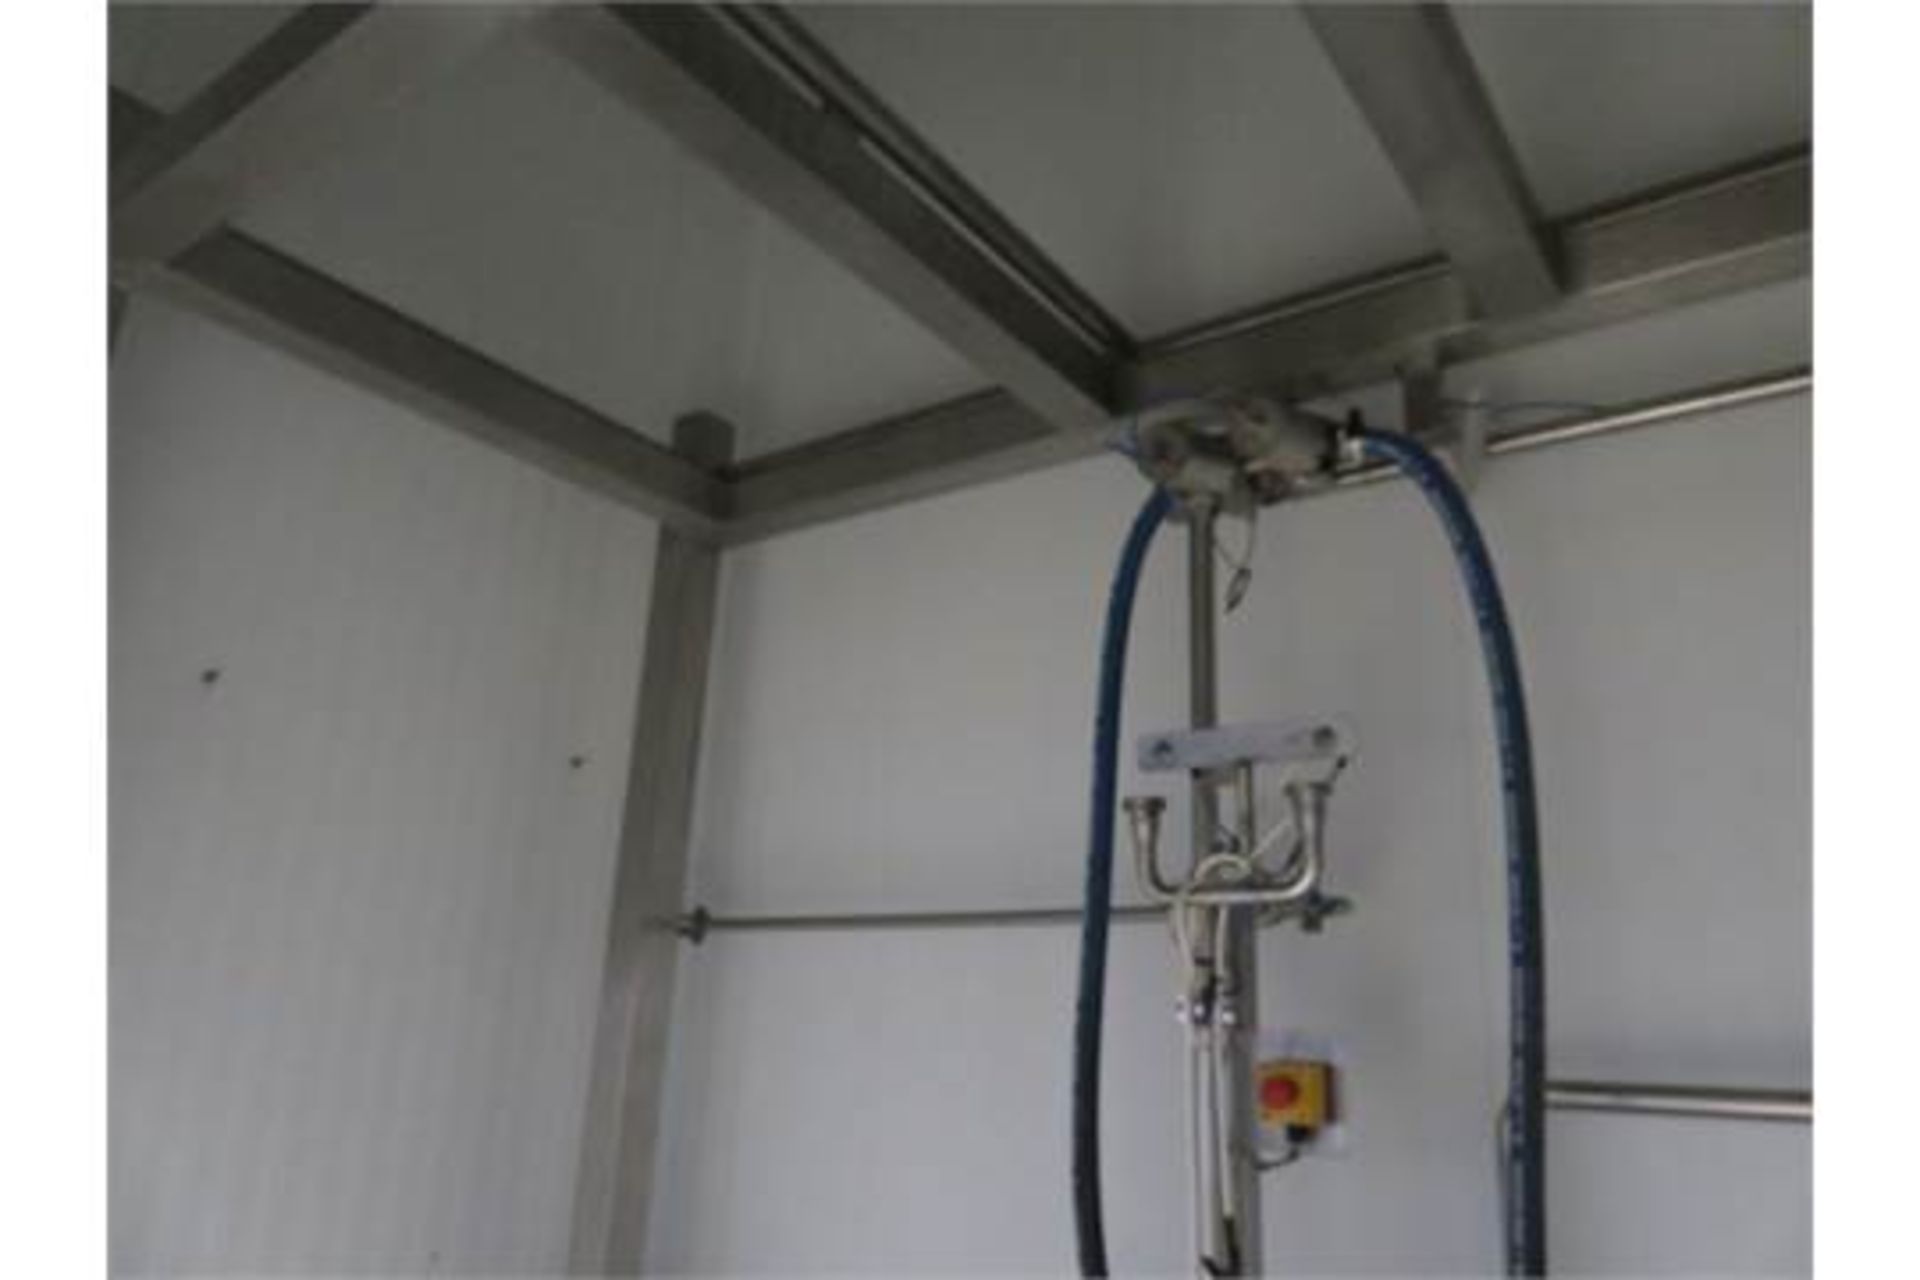 Skid mounted Yeast dosing system with refrigeration. Lift Out £200 - Image 2 of 9